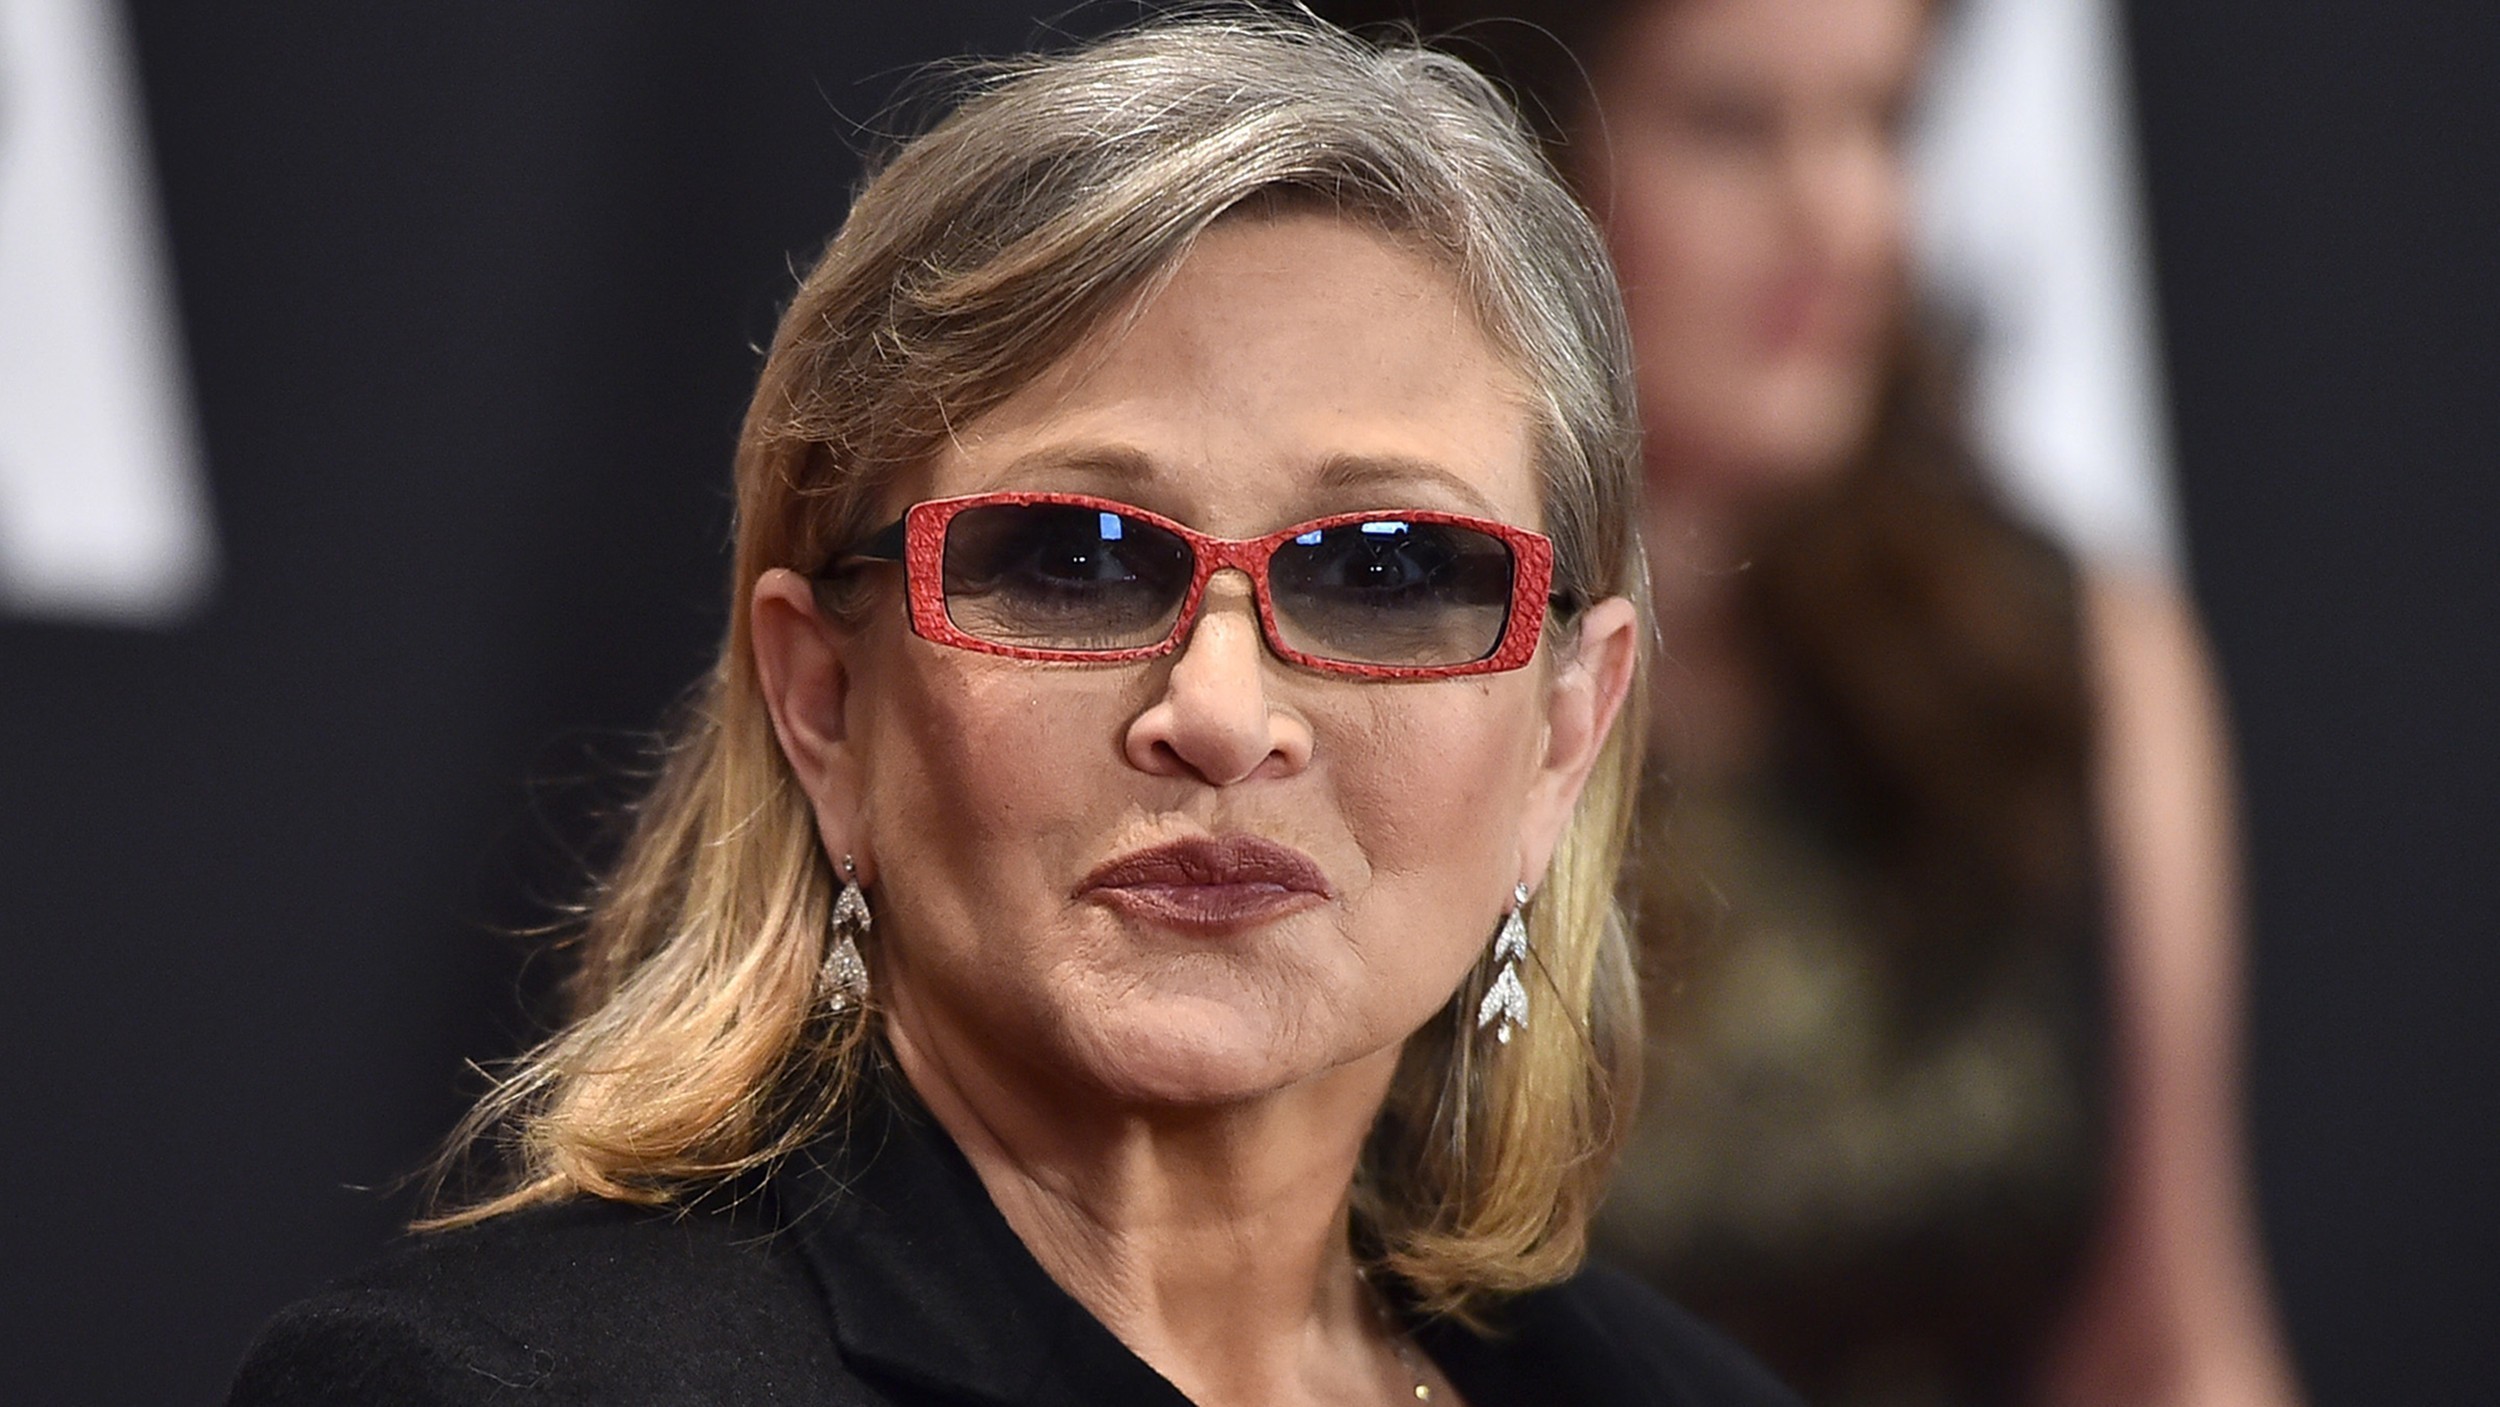 5. Carrie Fisher